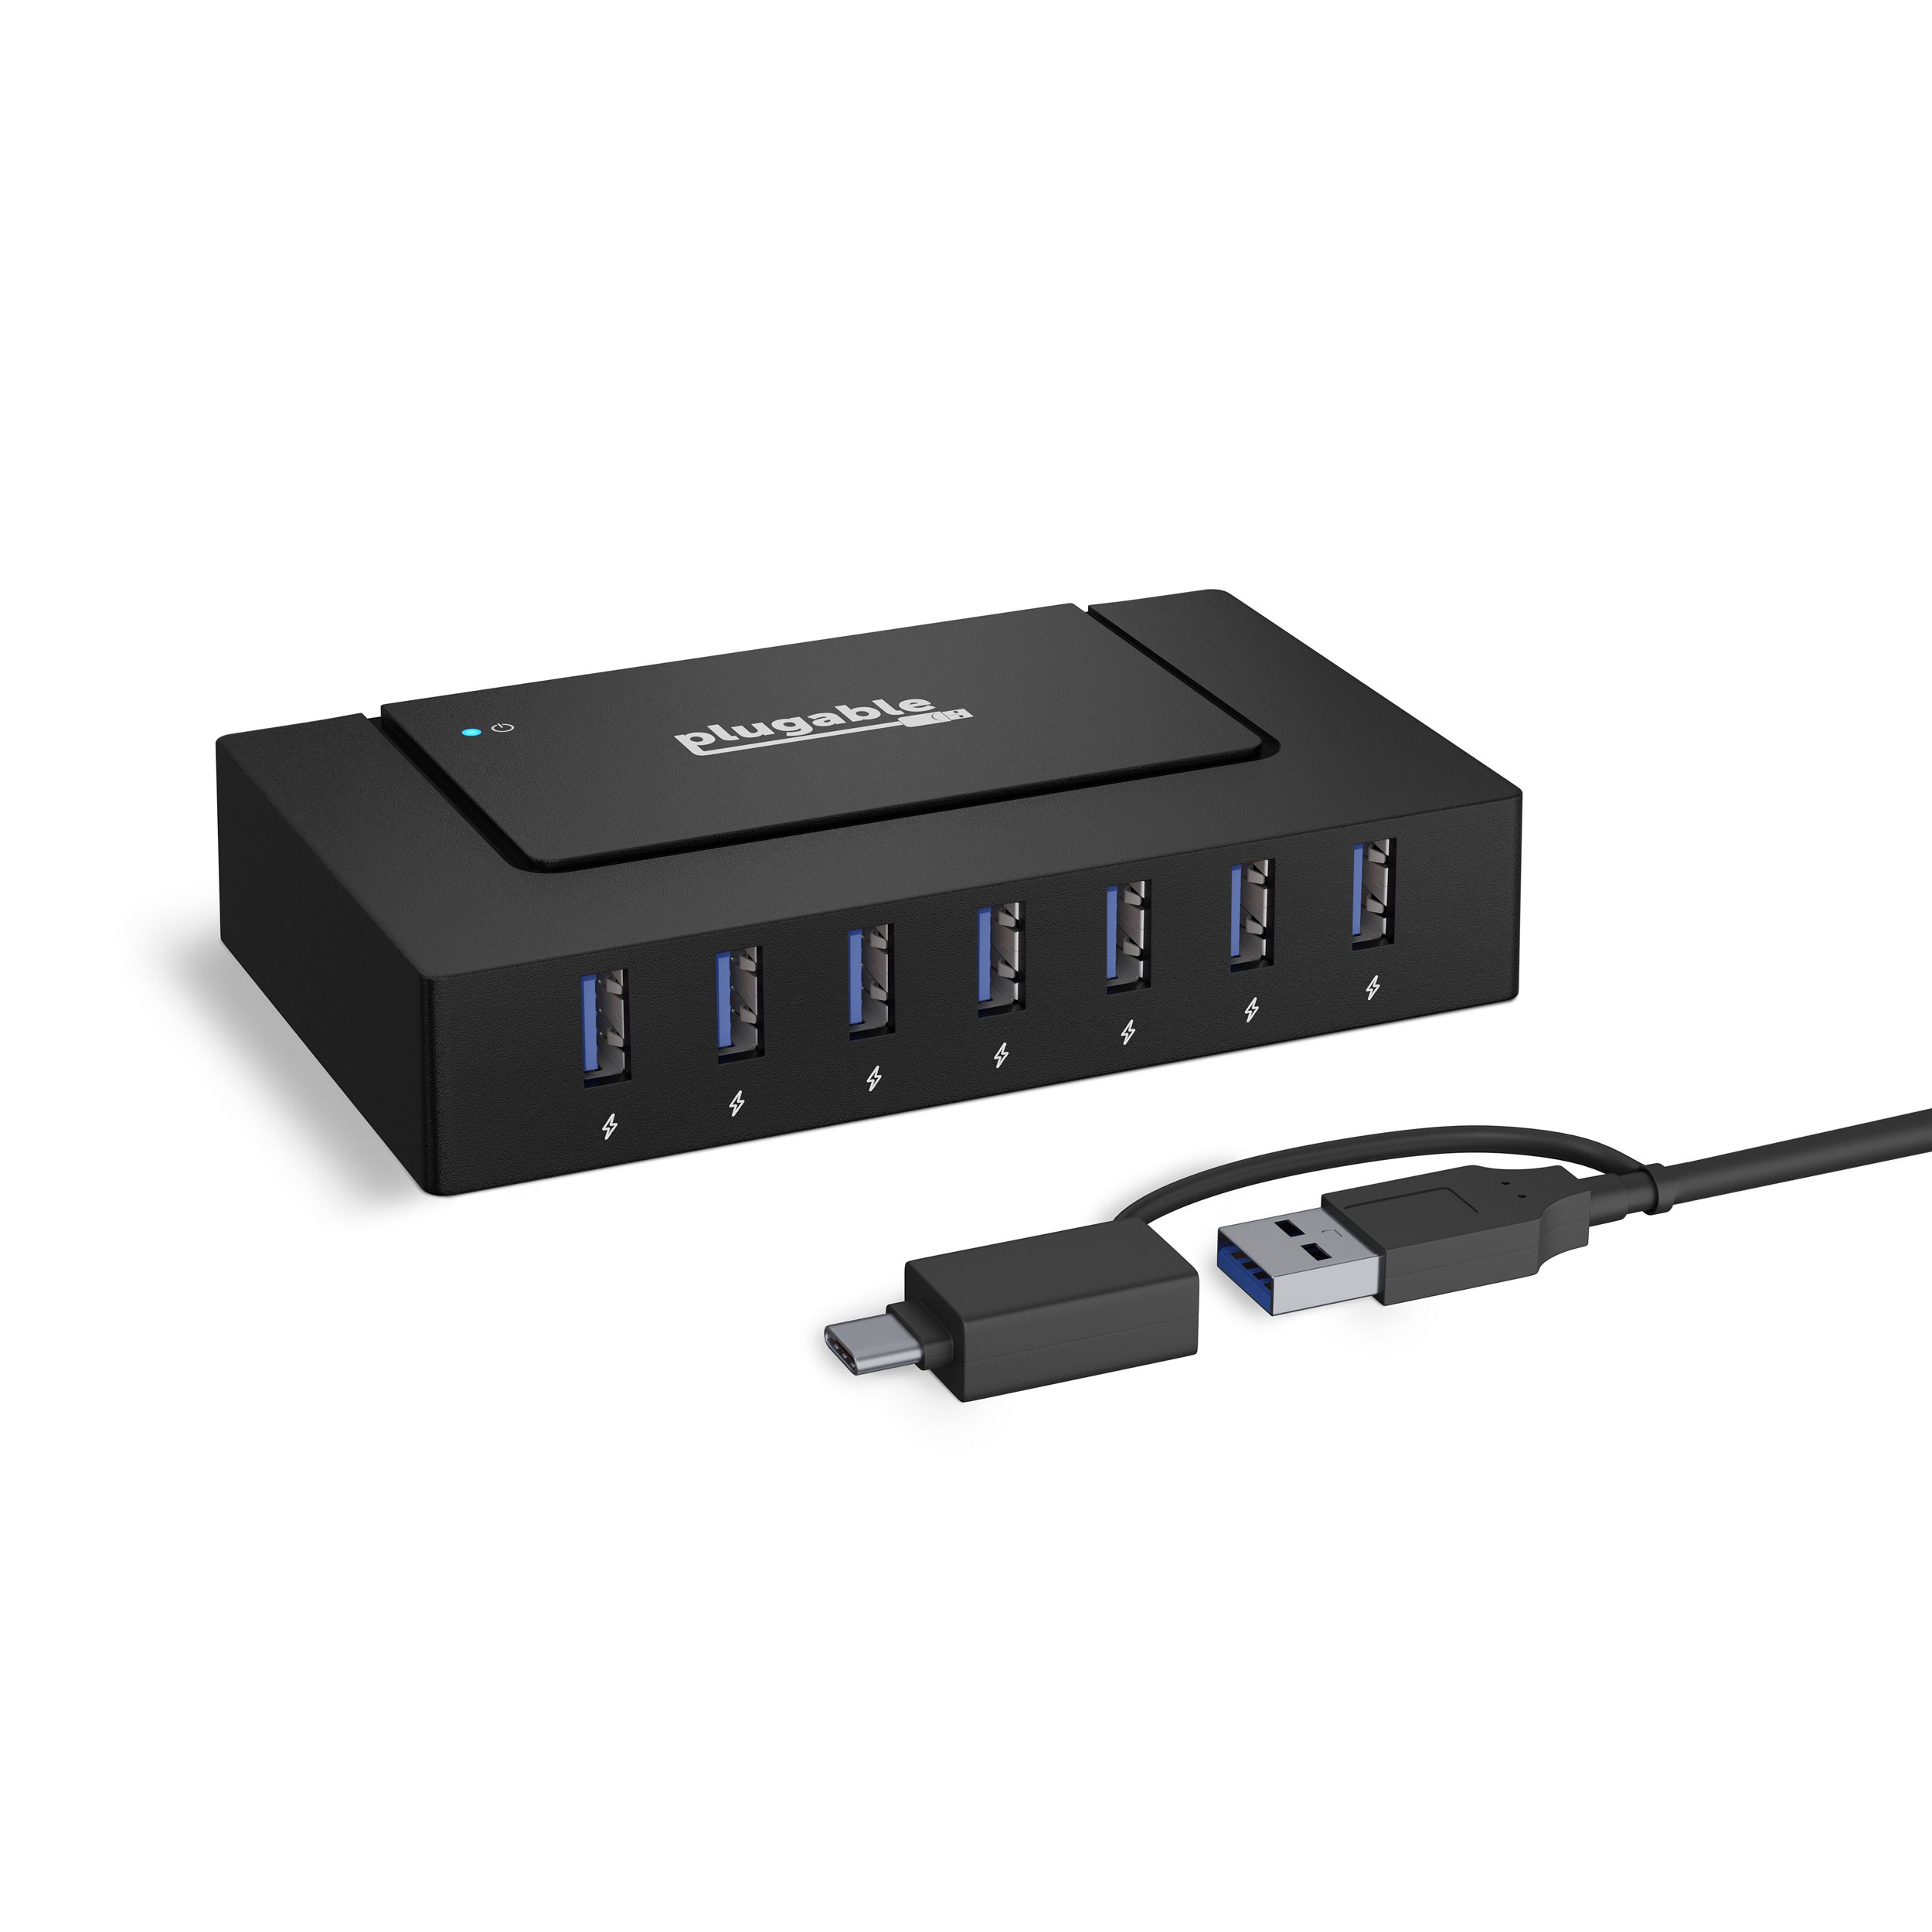 Plugable 7-in-1 USB Powered Hub for Laptops with USB-C or USB 3.0 - USB Power Station for Multiple Devices and USB Data Transfer with a 60W Power Adapter - image 1 of 9